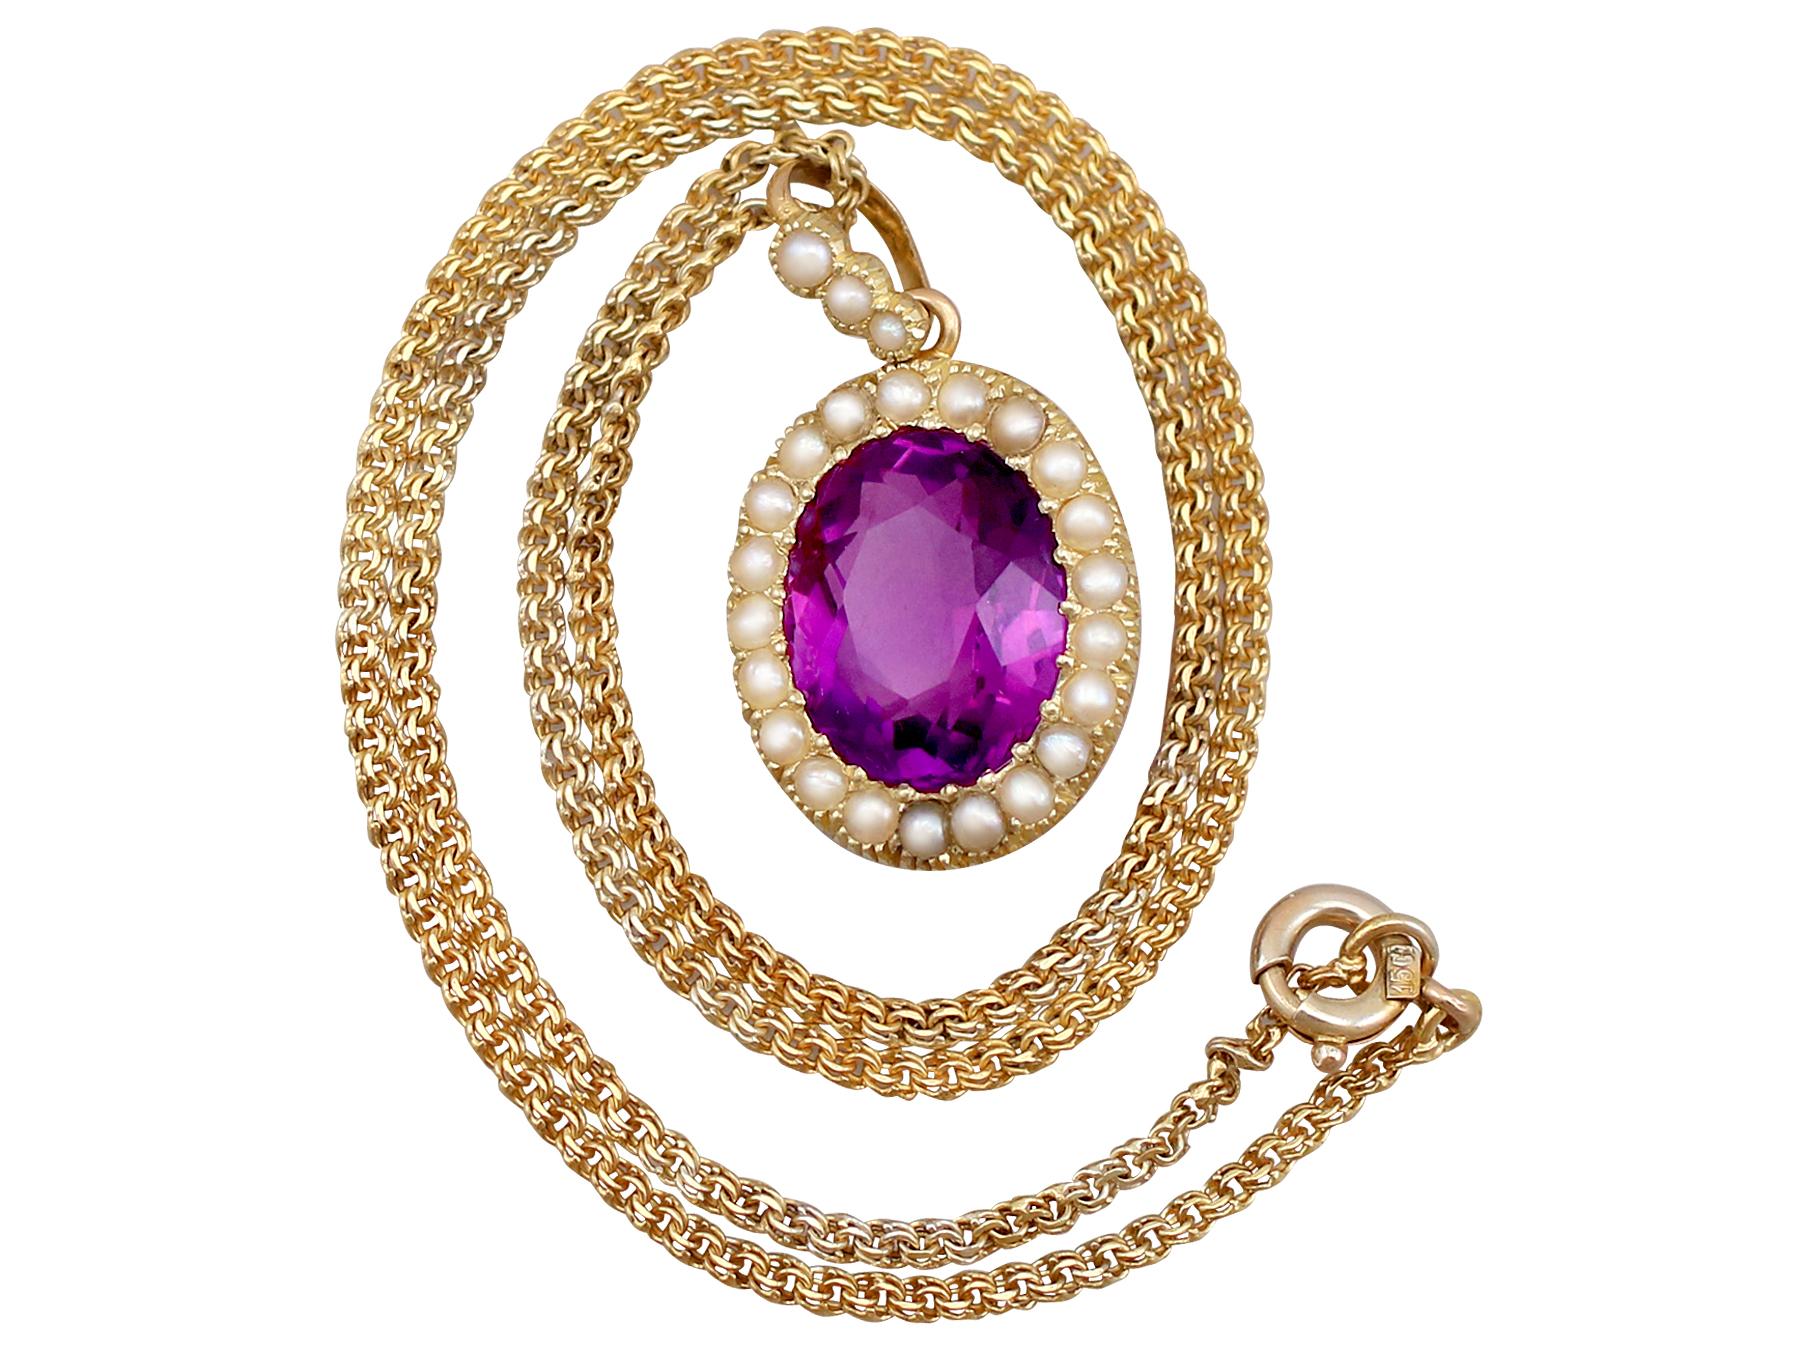 An impressive antique 6.56 carat amethyst and seed pearl, 15k yellow gold pendant with 18k yellow gold chain; part of our antique jewellery collections.

This fine and impressive antique amethyst pendant has been crafted in 15k yellow gold, with an